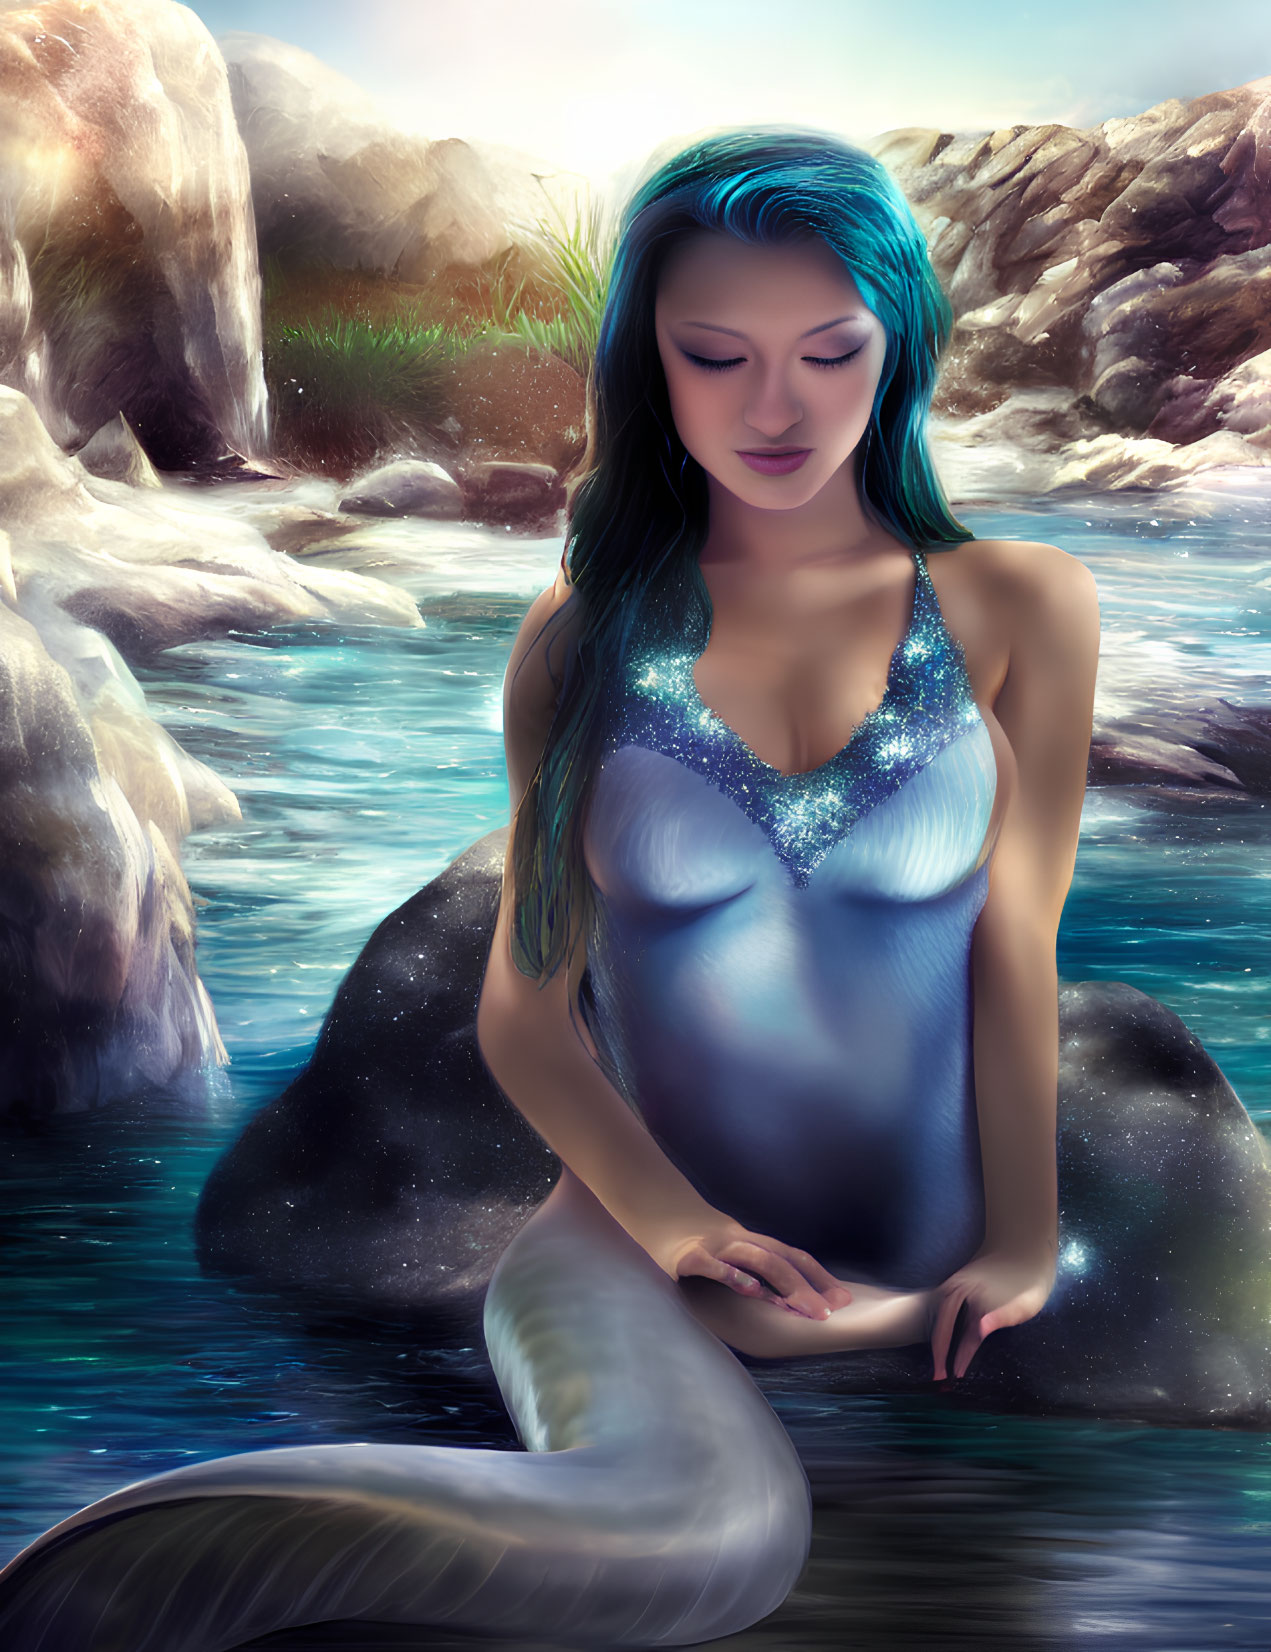 Blue-haired mermaid on rock by serene river with boulders and greenery